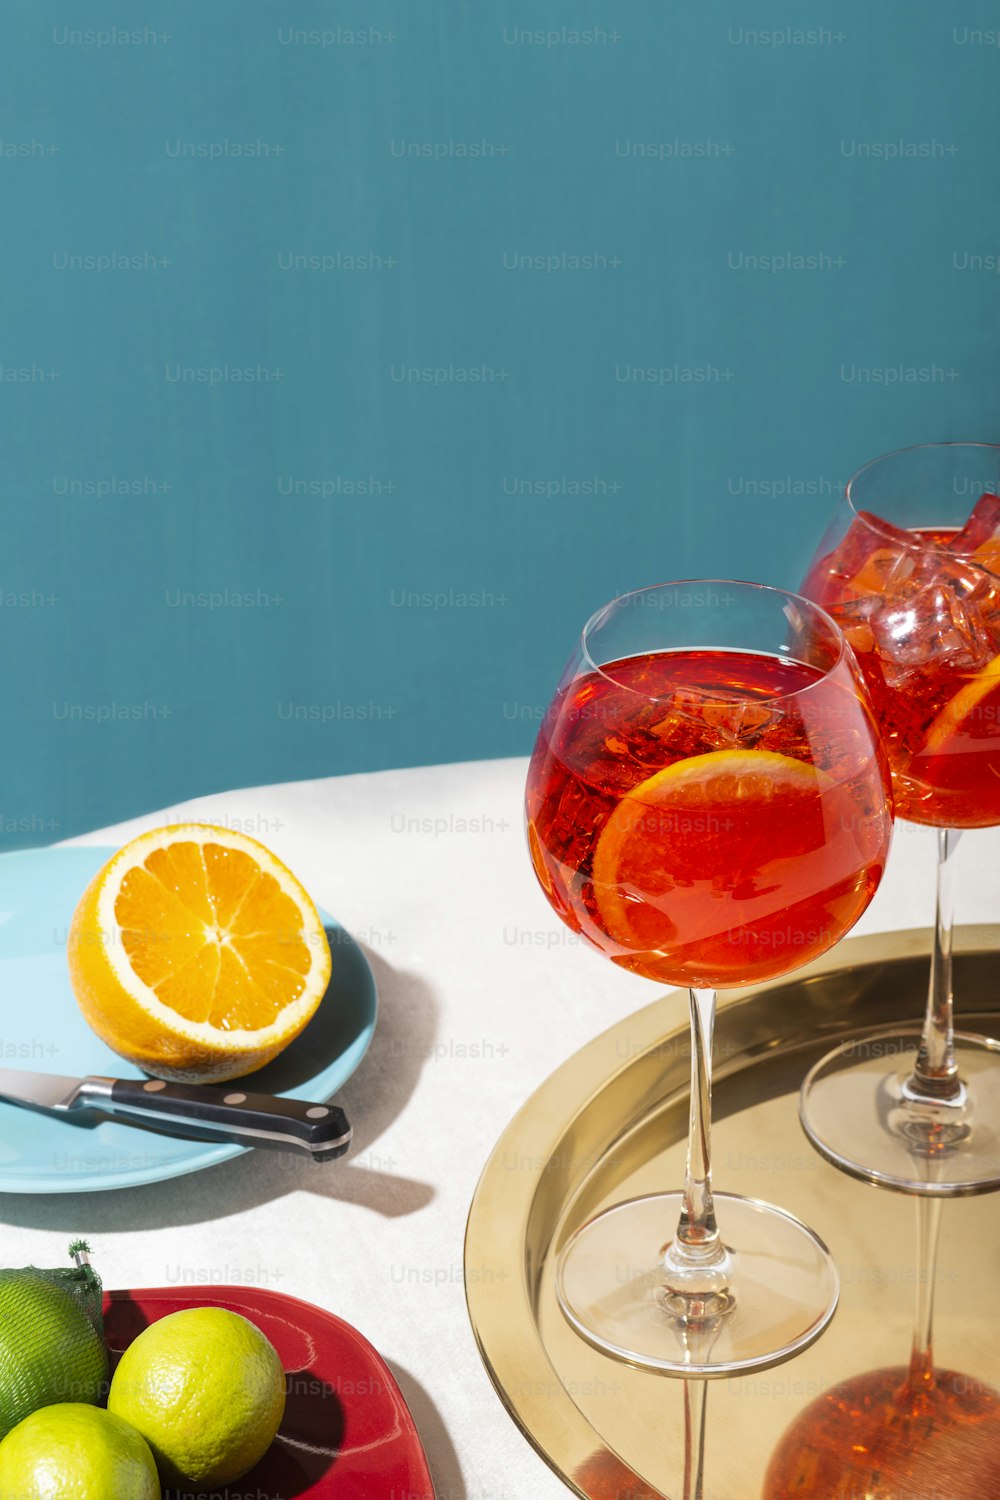 Spritz veneziano, an IBA cocktail, with Prosecco or white sparkling wine, bitter, soda, ice and a slice of orange, in a calix on a table, pop graphic style